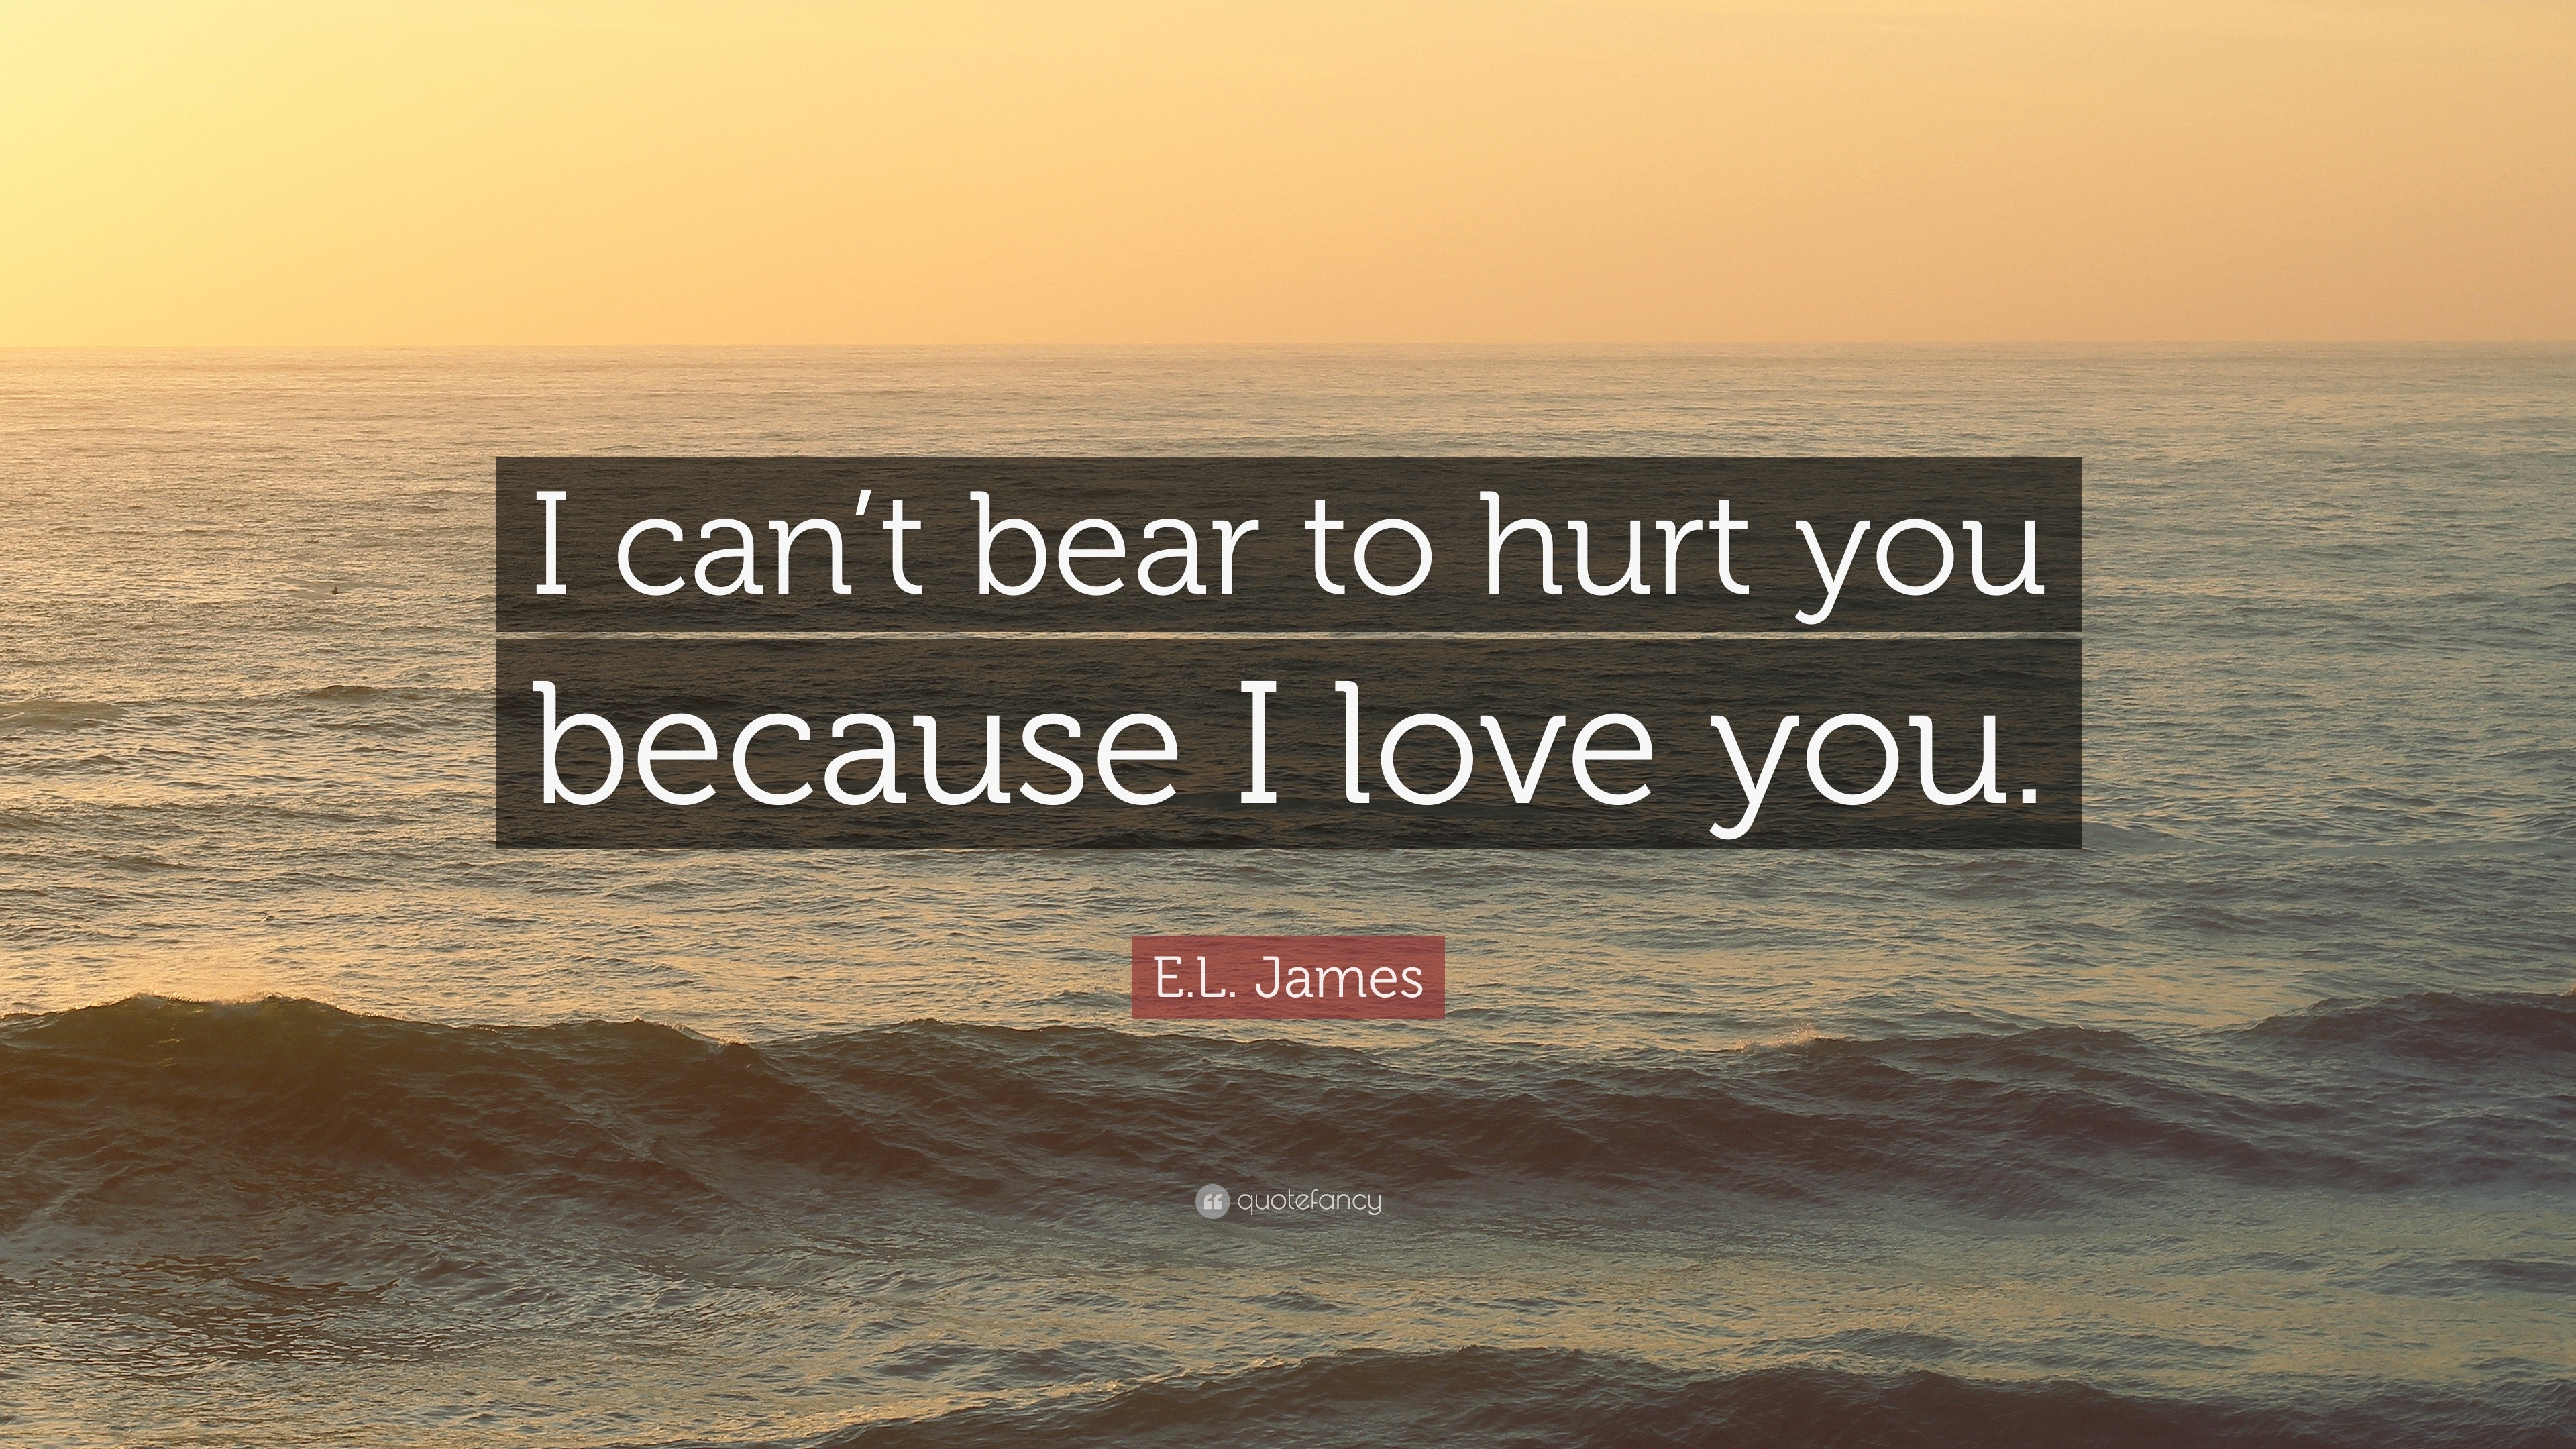 E L James Quote “I can t bear to hurt you because I love